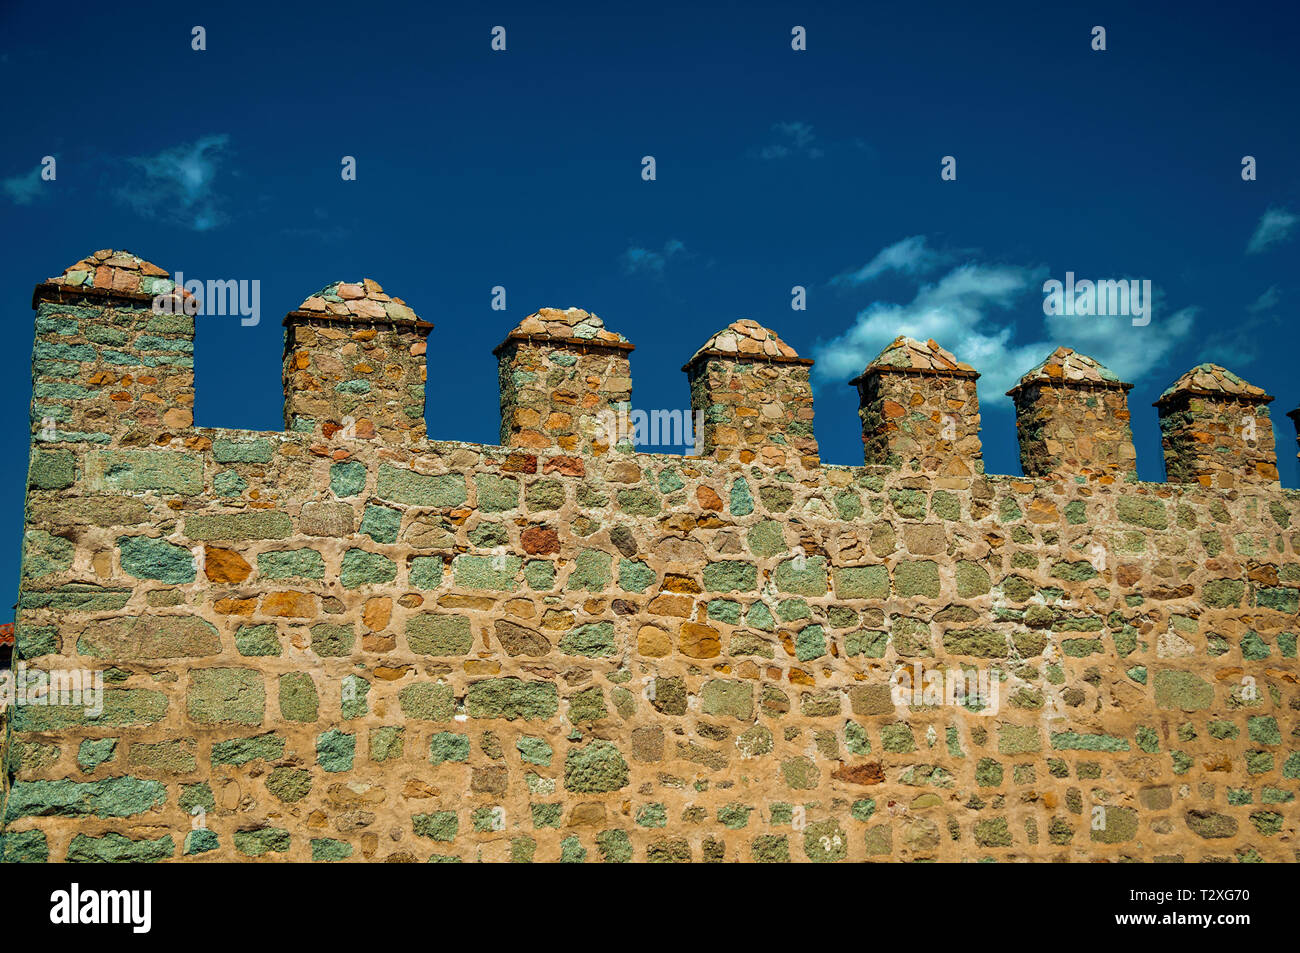 Battlement with merlons and crenels over rough stone wall encircling the town of Avila. With an imposing wall around the gothic city center in Spain. Stock Photo